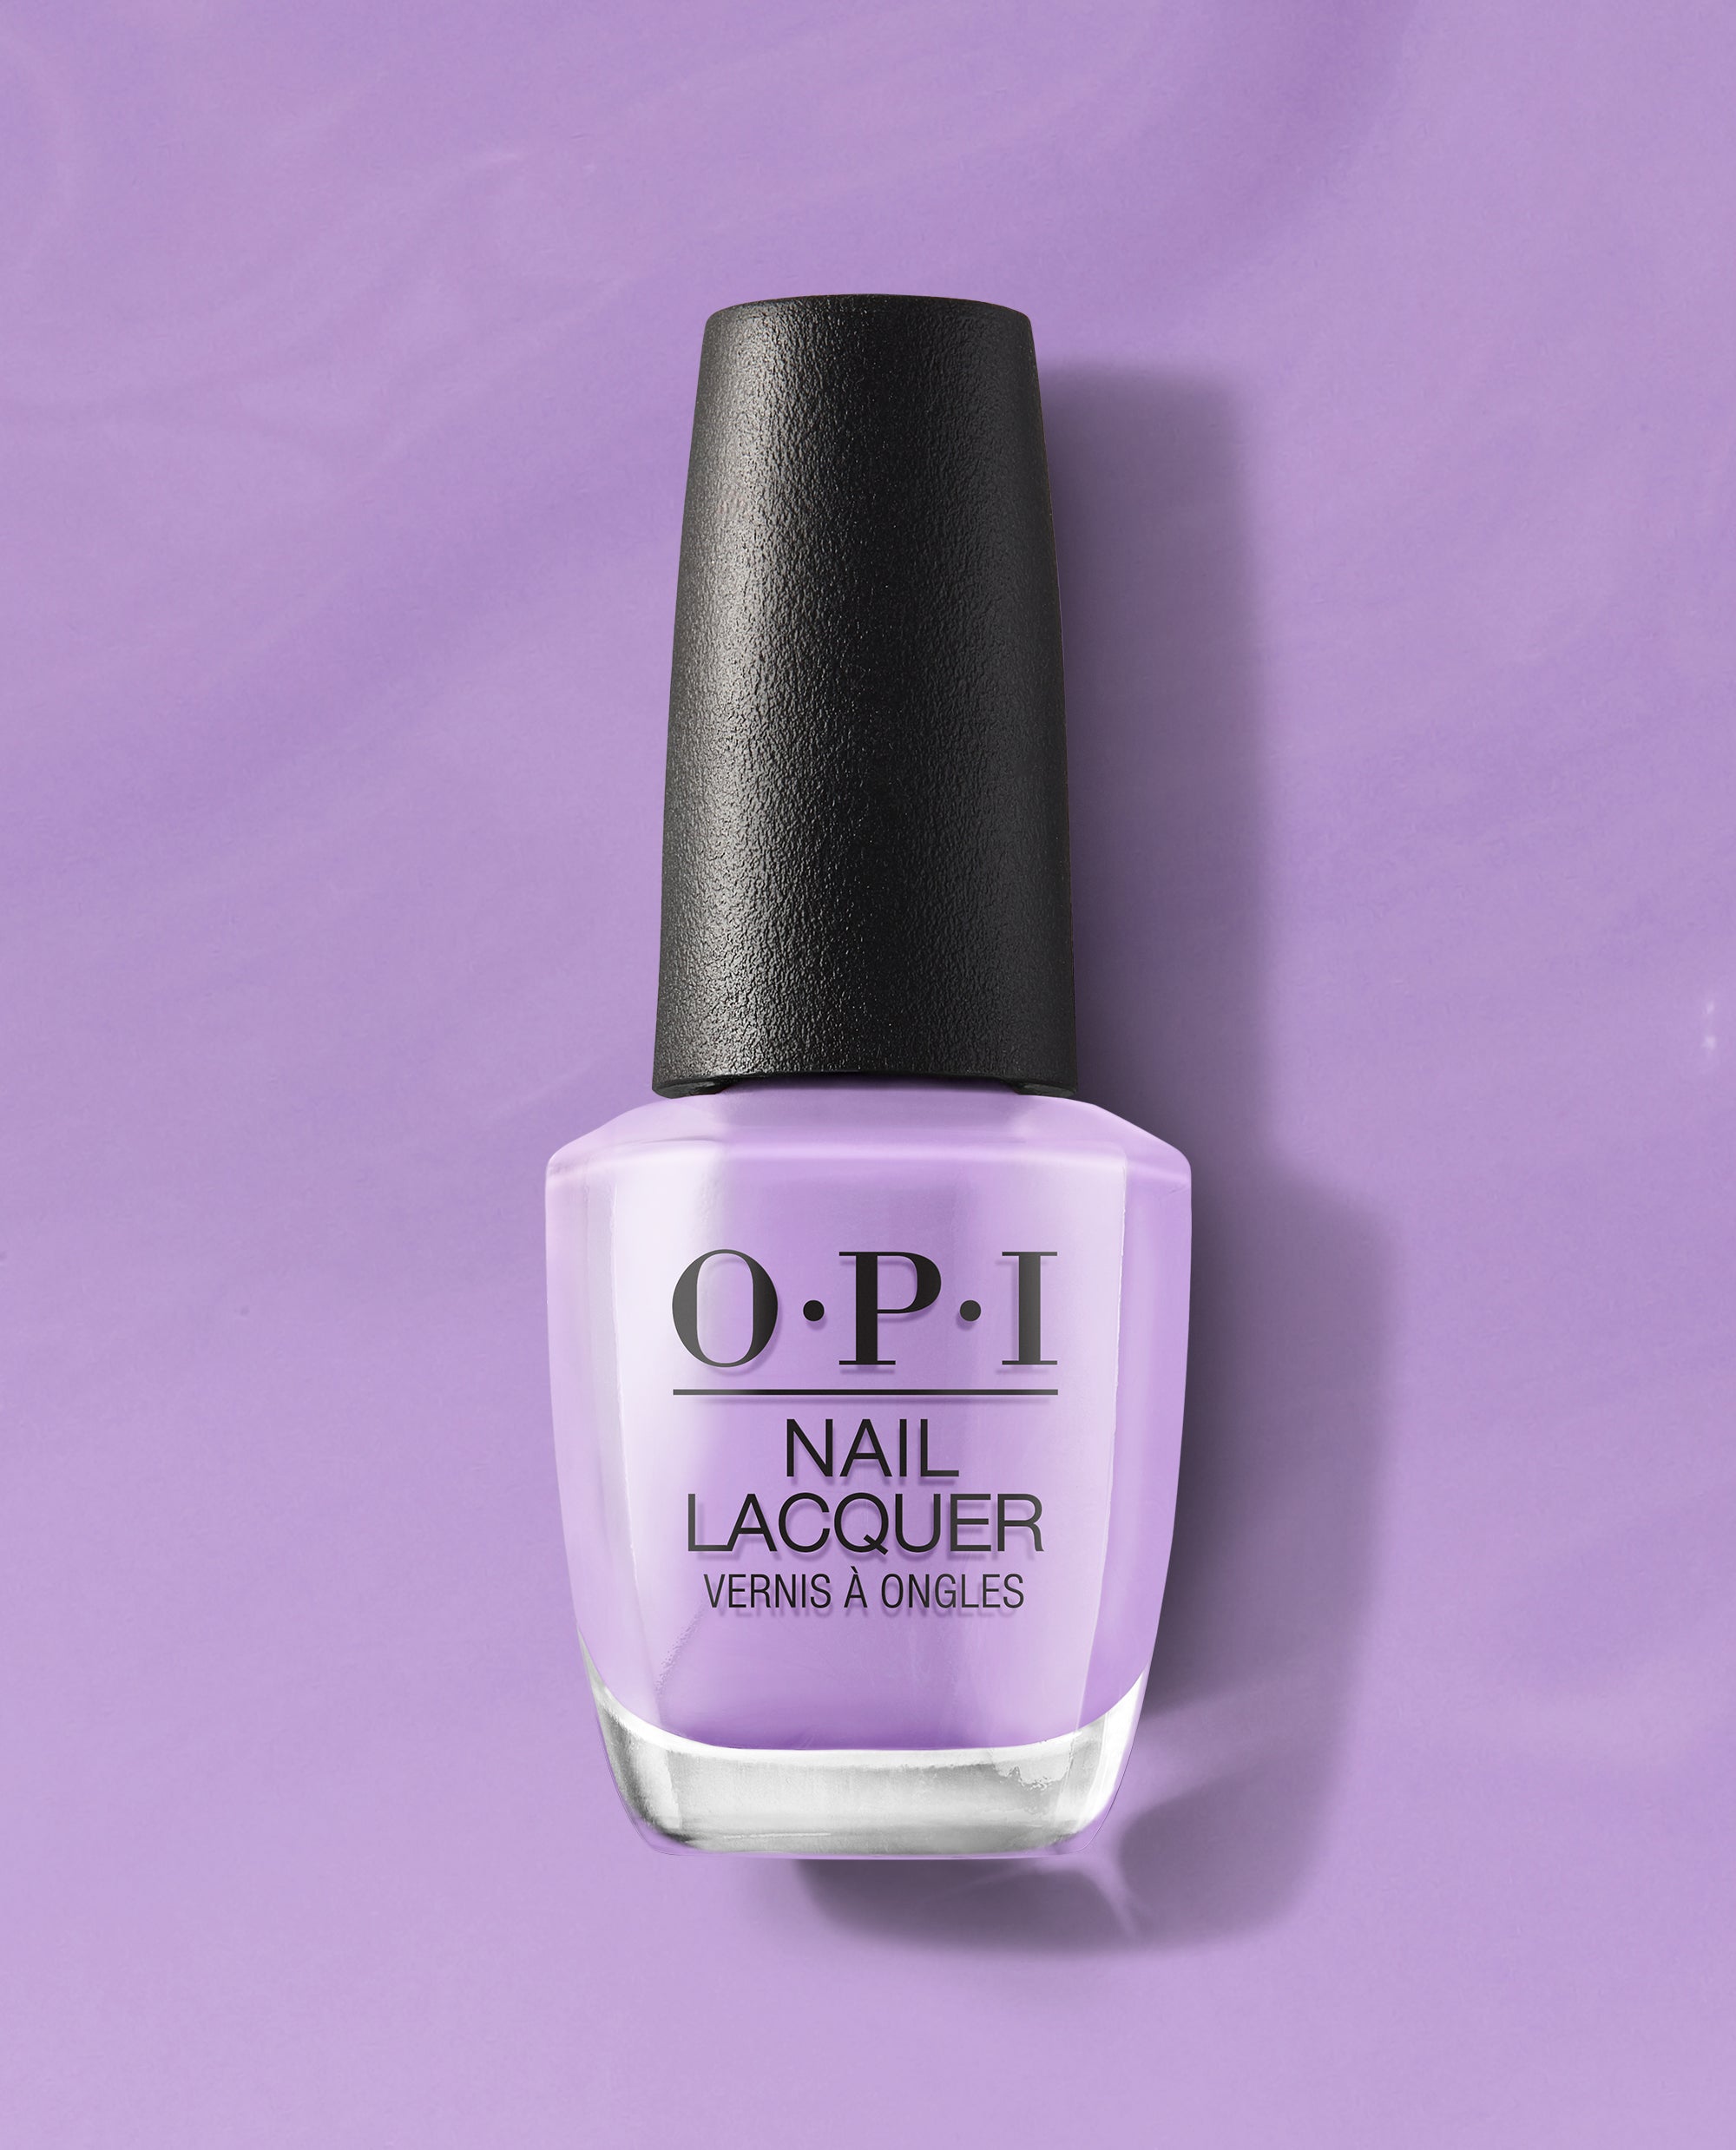 OPI nail lacquer: the stories behind my favourite shades – Scratch